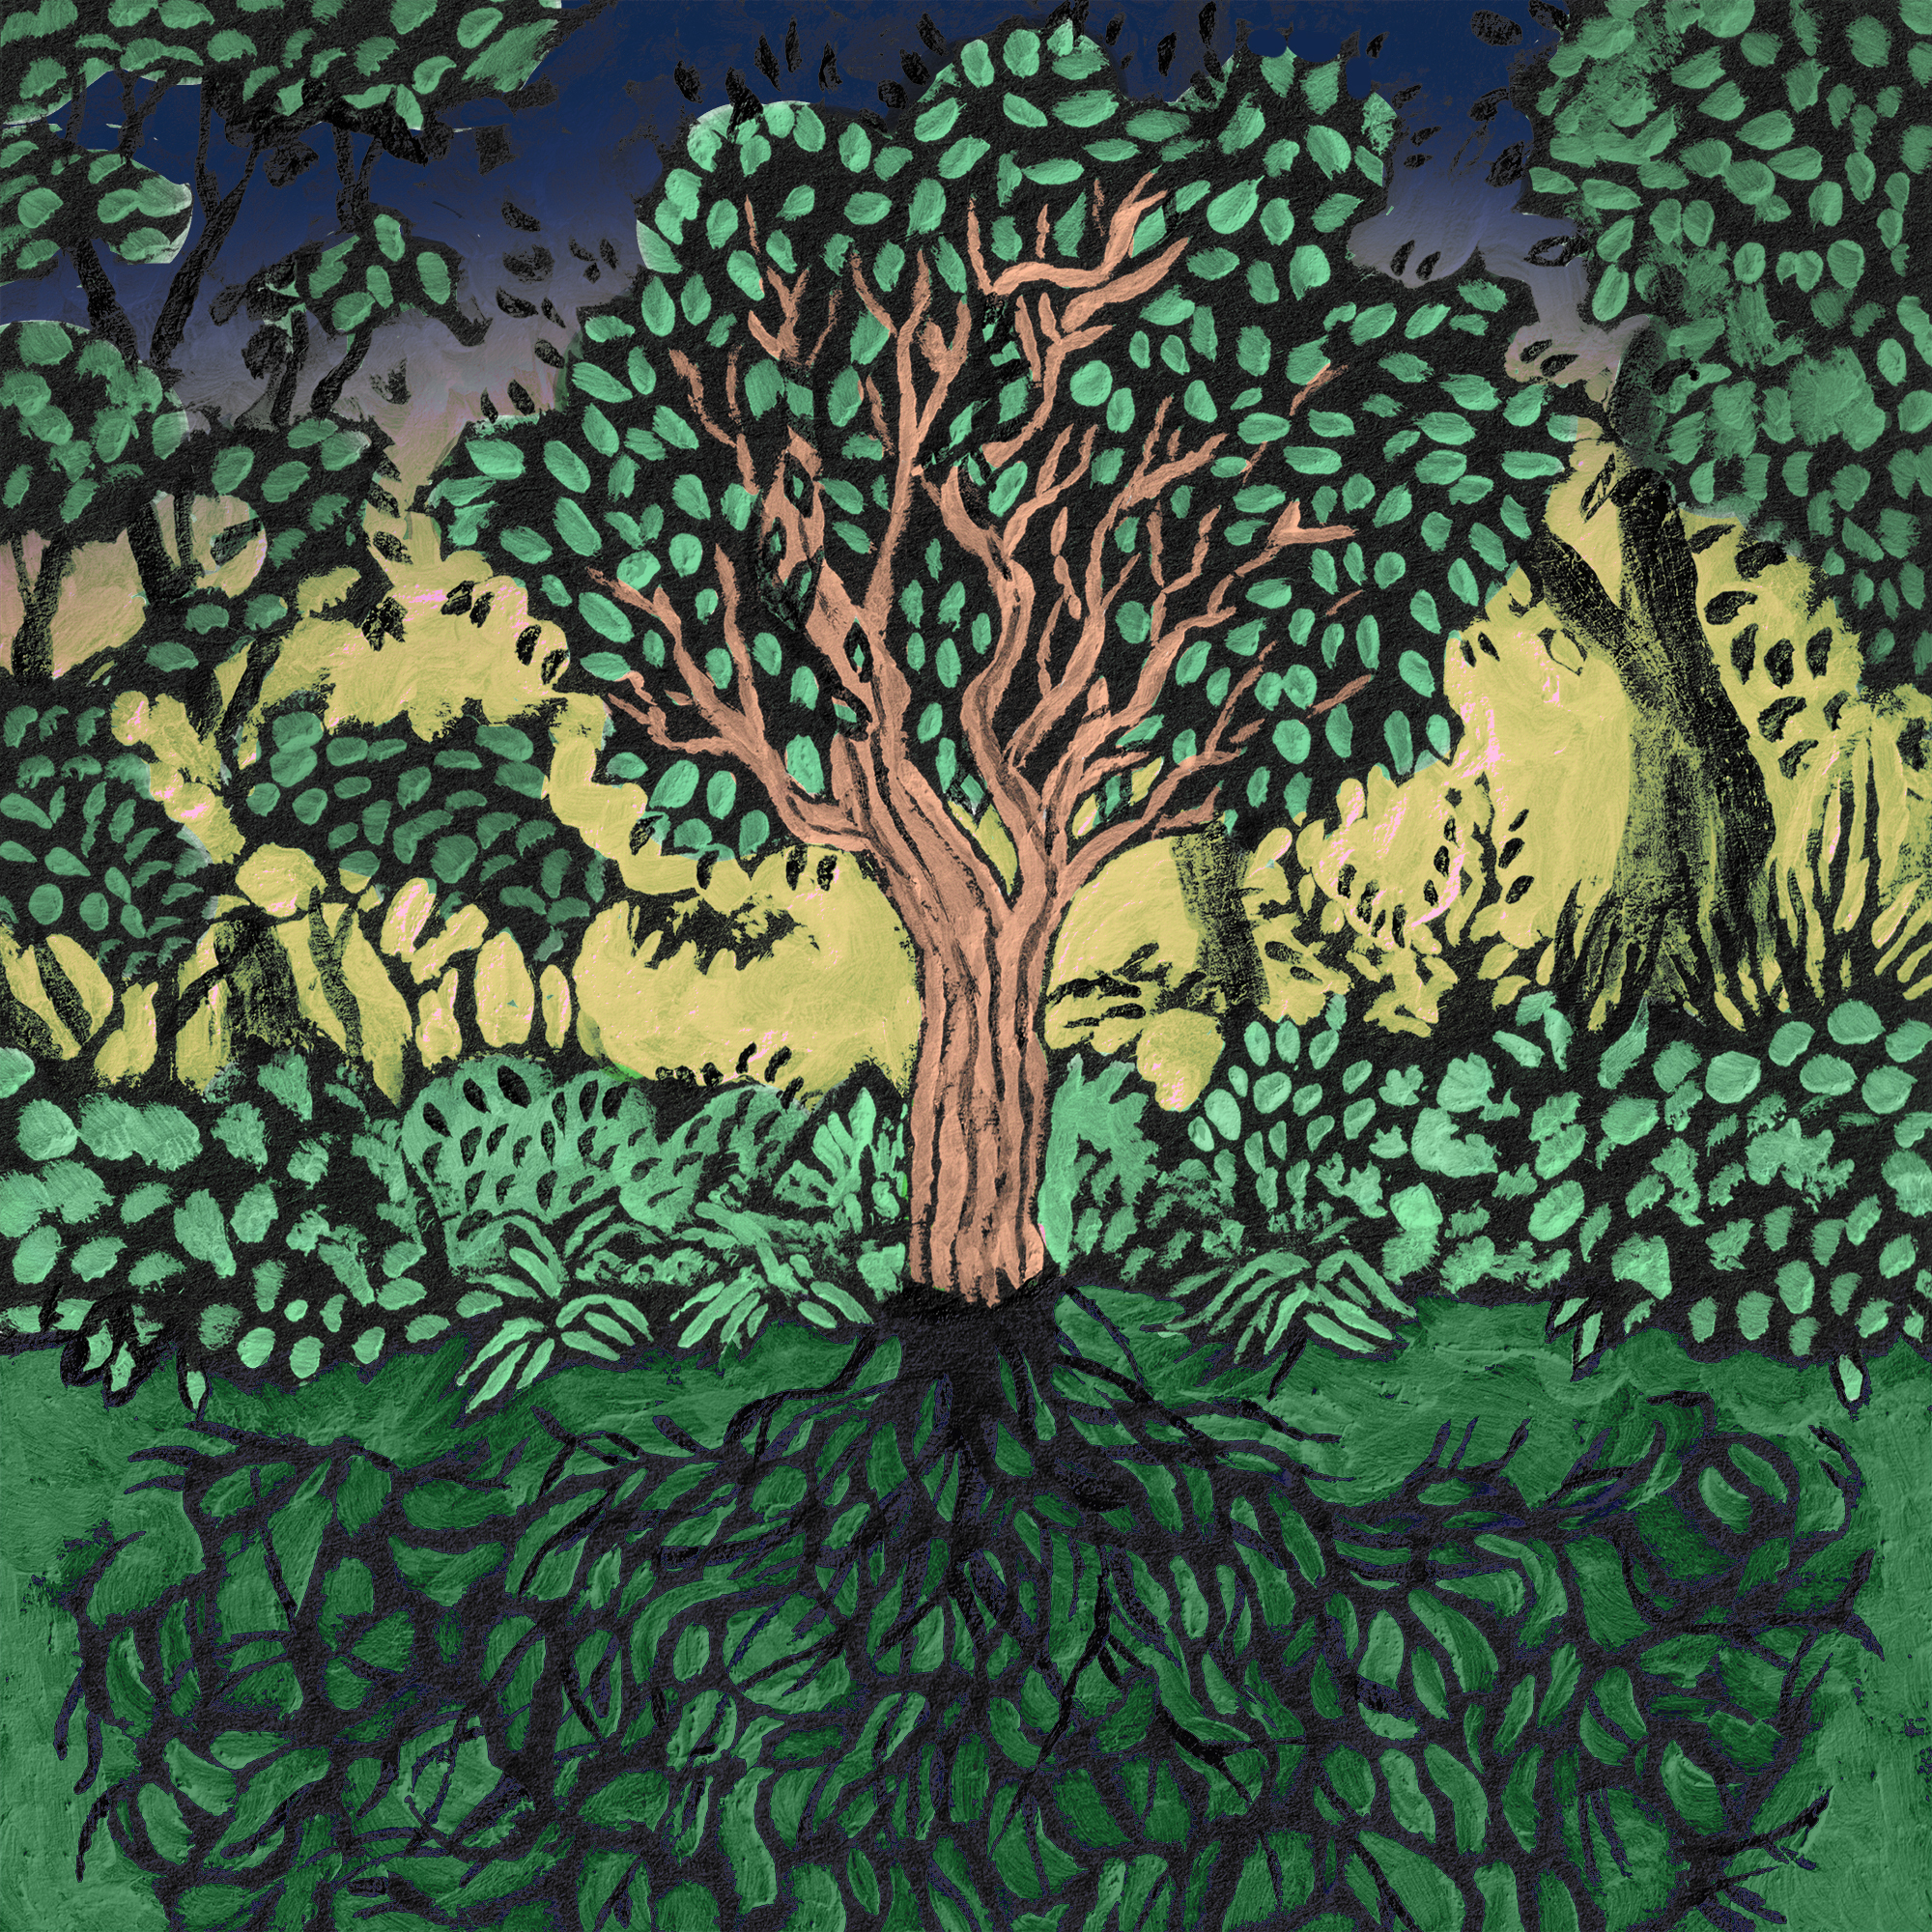 Hand drawn illustration of a tree with roots in a forest